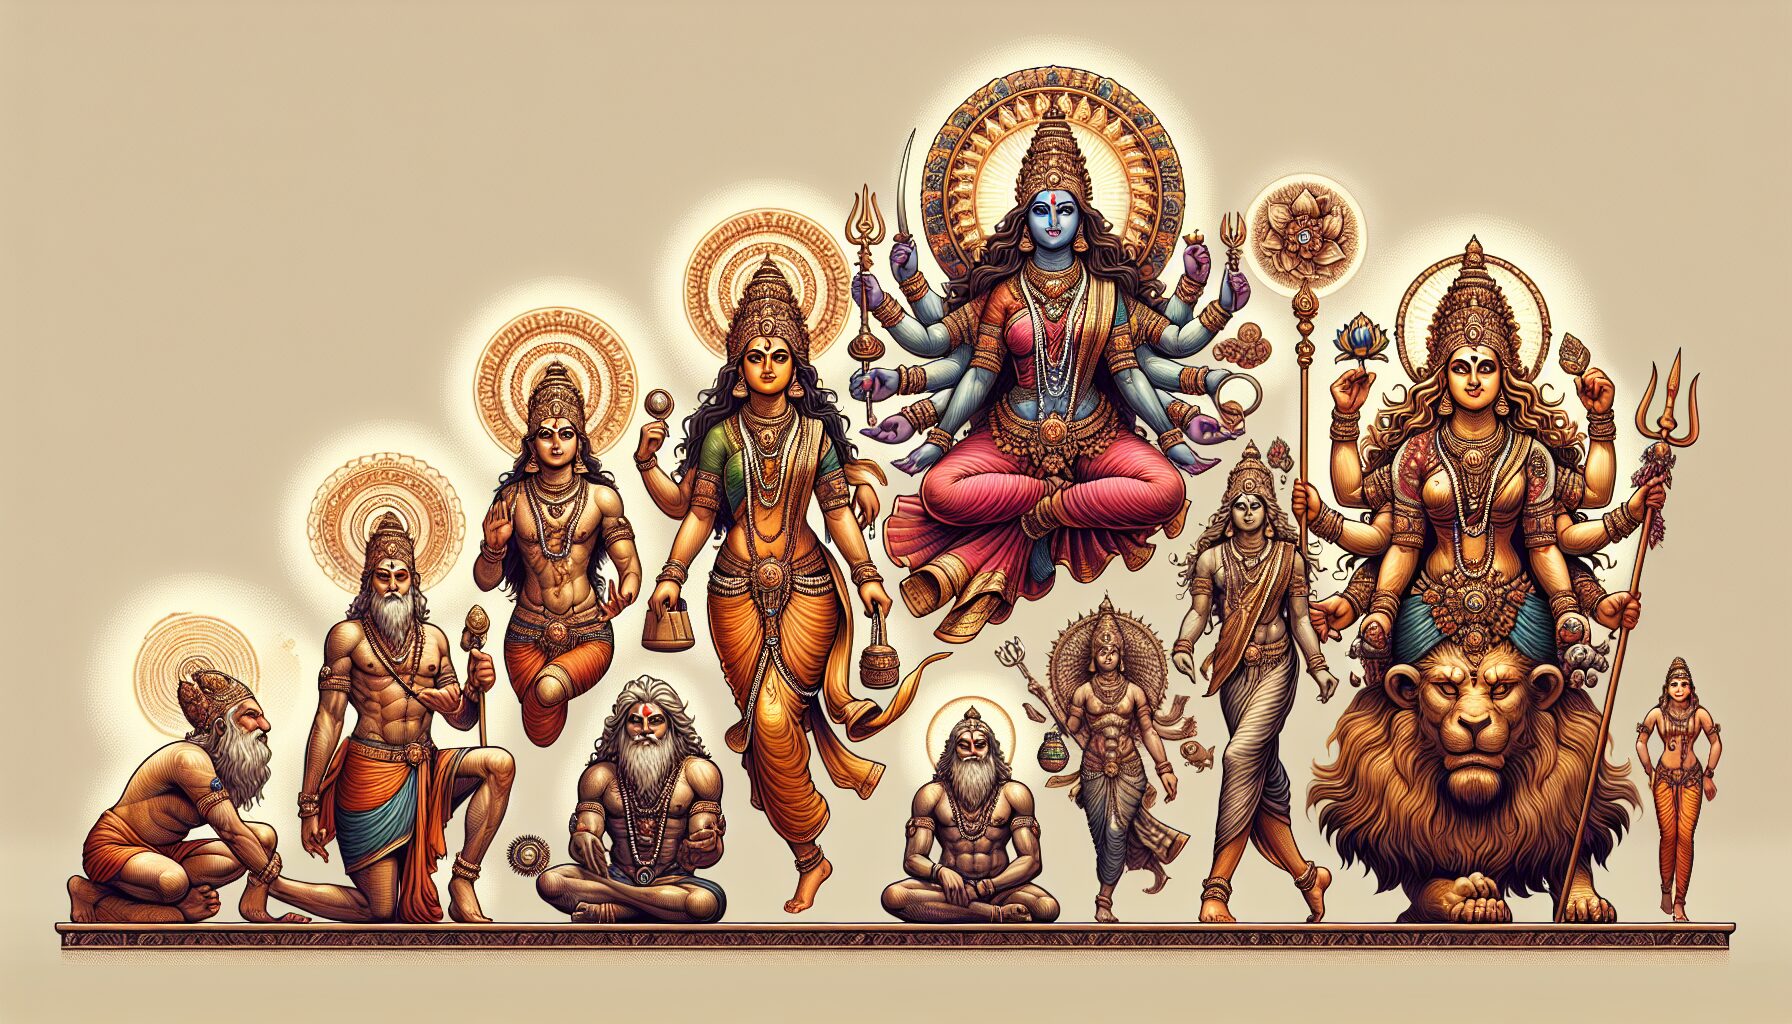 How Have The Hindu Gods Evolved Over History?